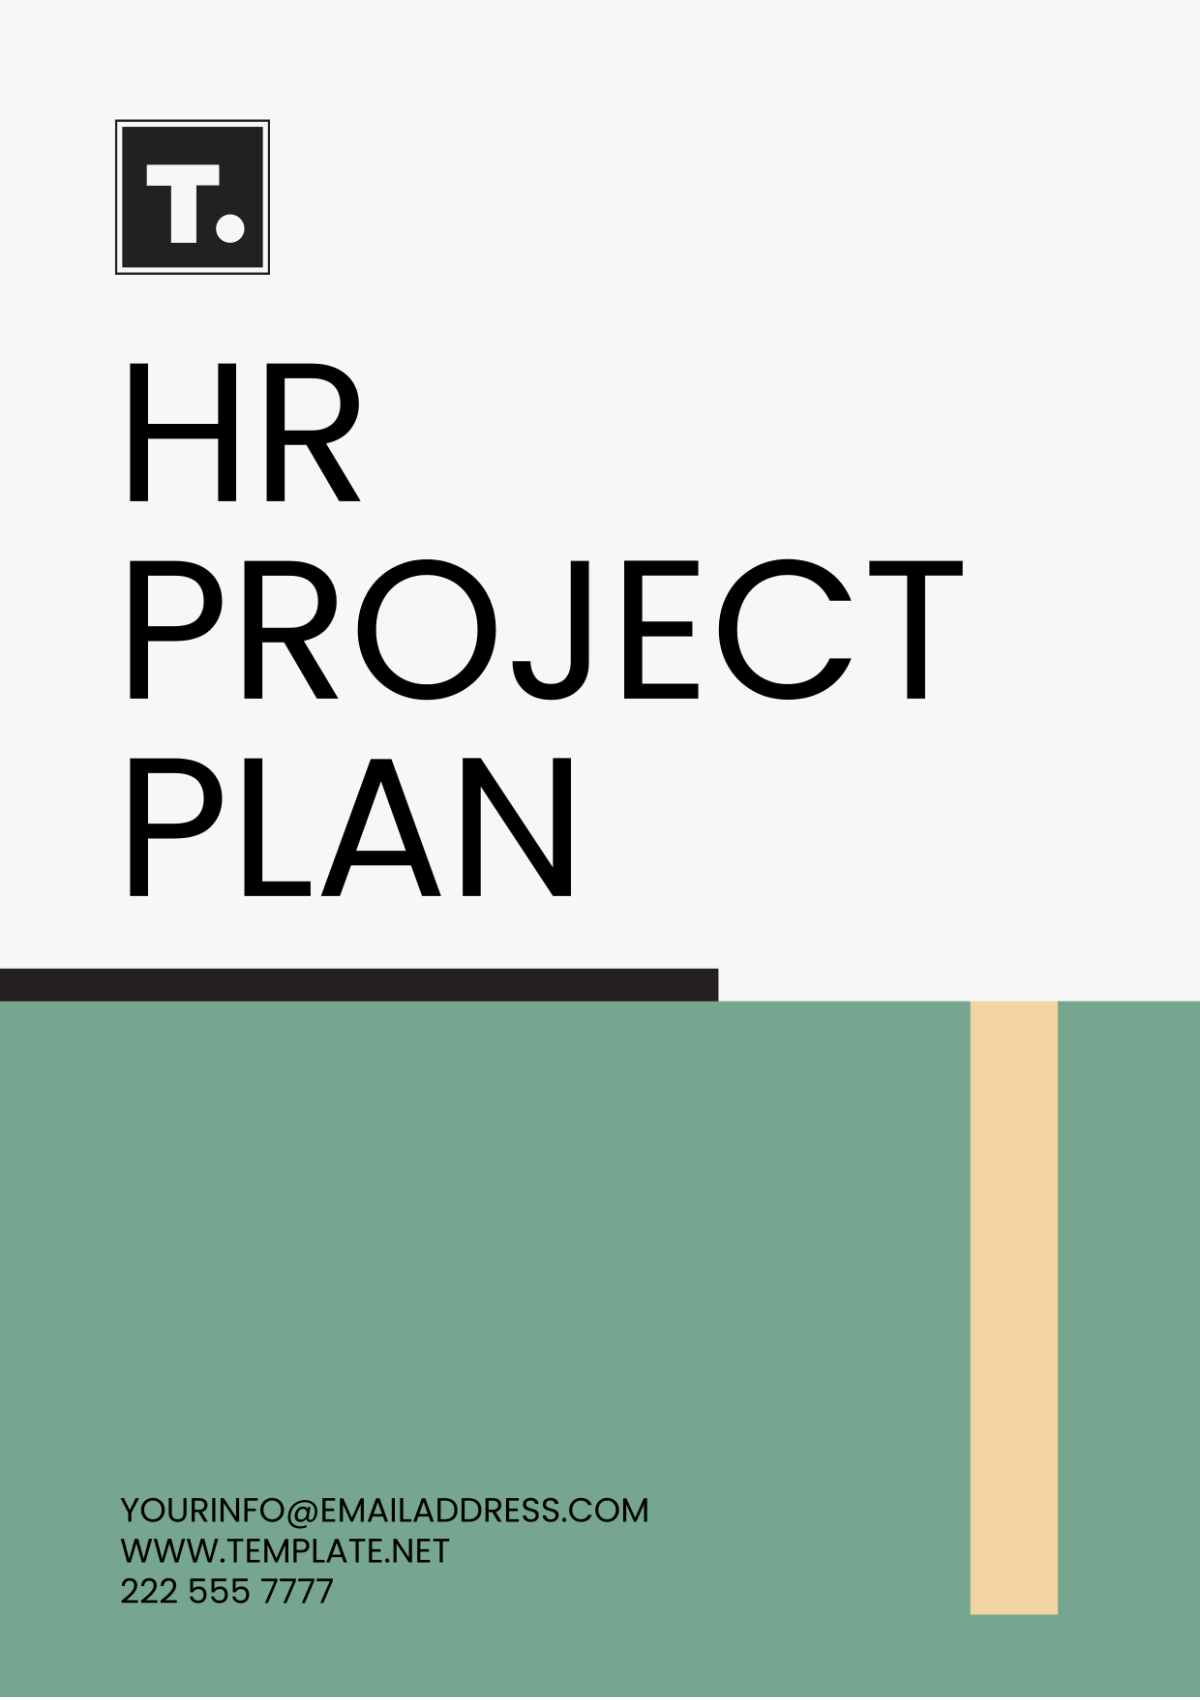 HR Project Plan Template